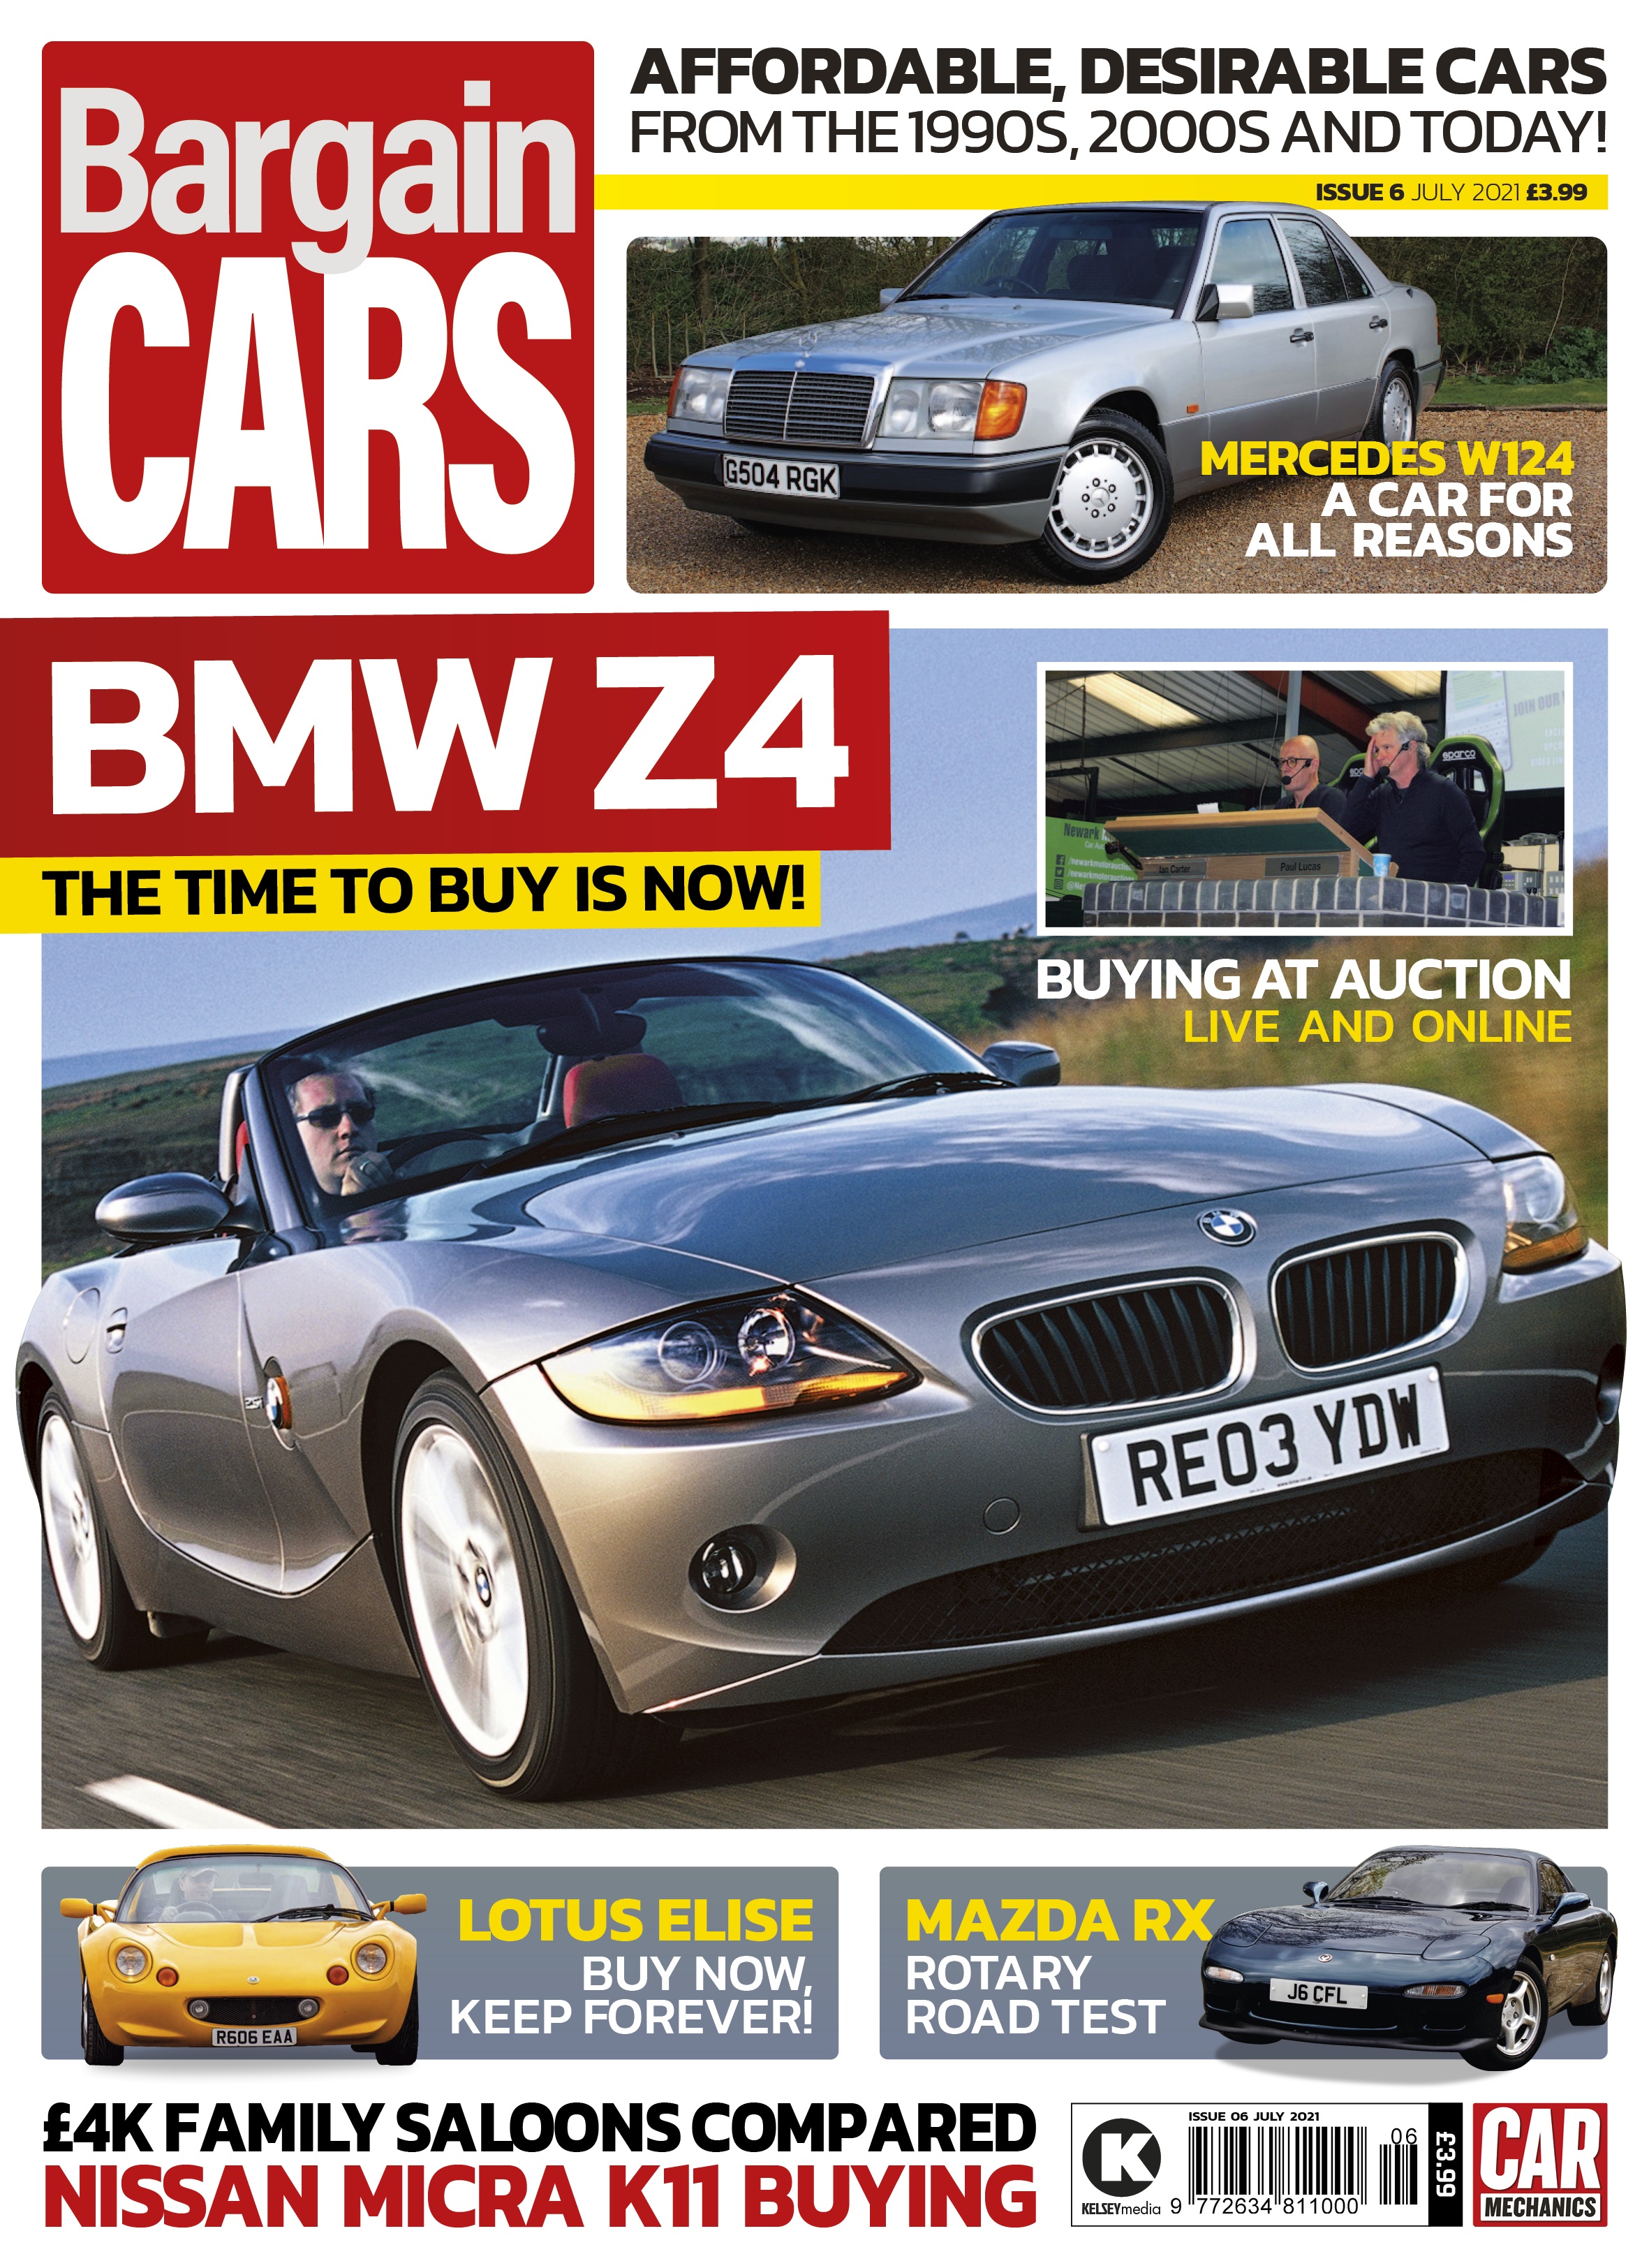 Bargain Cars Issue 6 - July 21